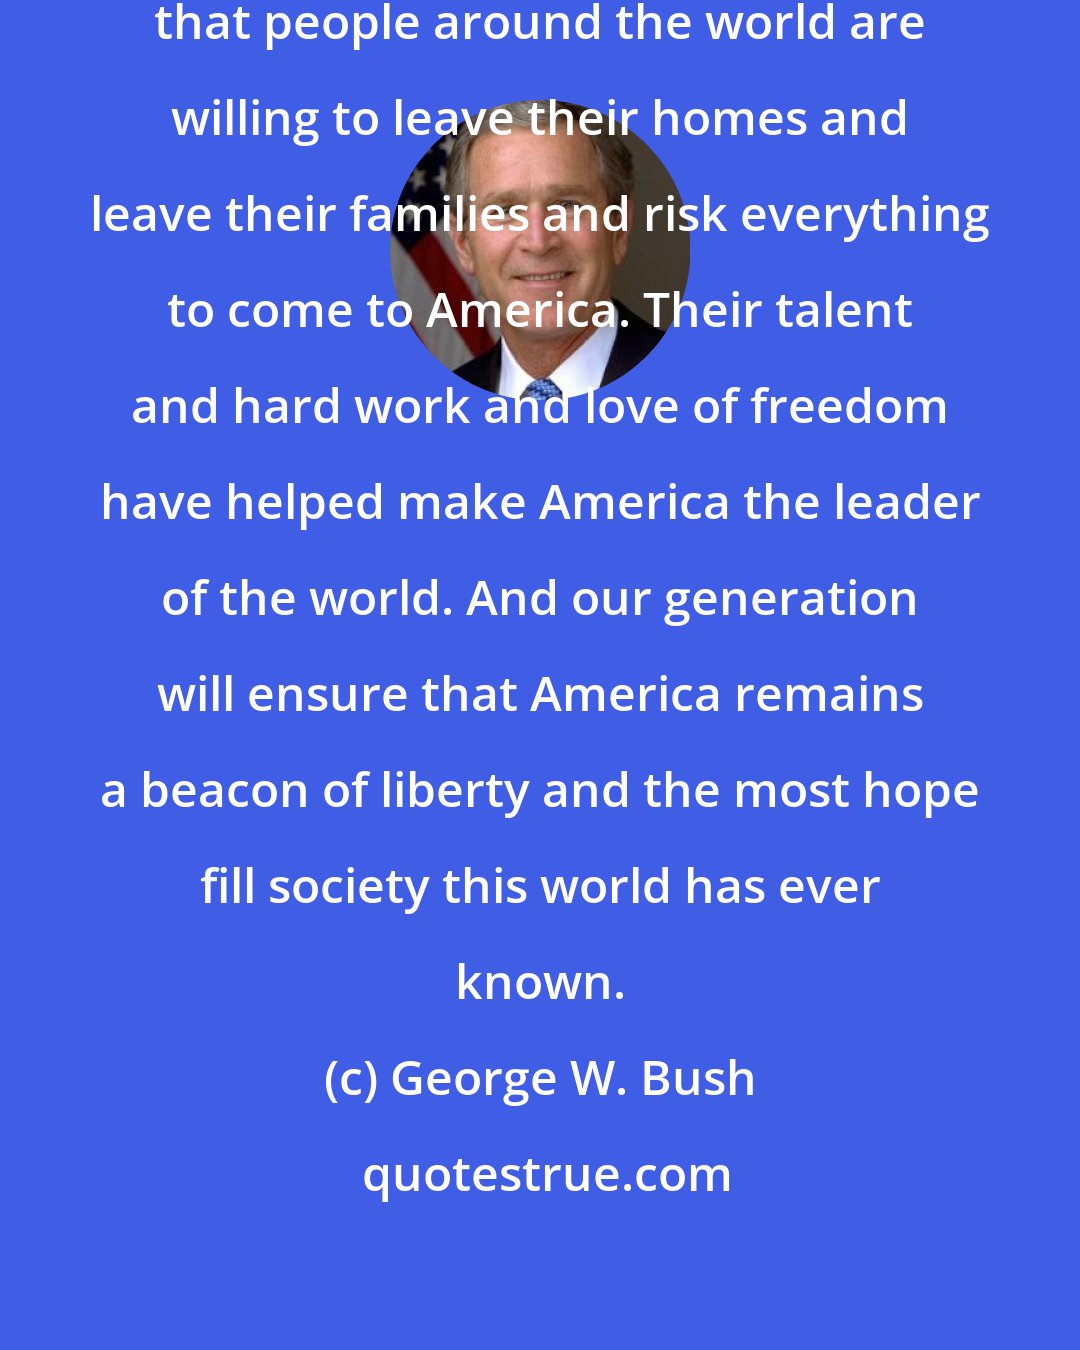 George W. Bush: It says something about our country that people around the world are willing to leave their homes and leave their families and risk everything to come to America. Their talent and hard work and love of freedom have helped make America the leader of the world. And our generation will ensure that America remains a beacon of liberty and the most hope fill society this world has ever known.